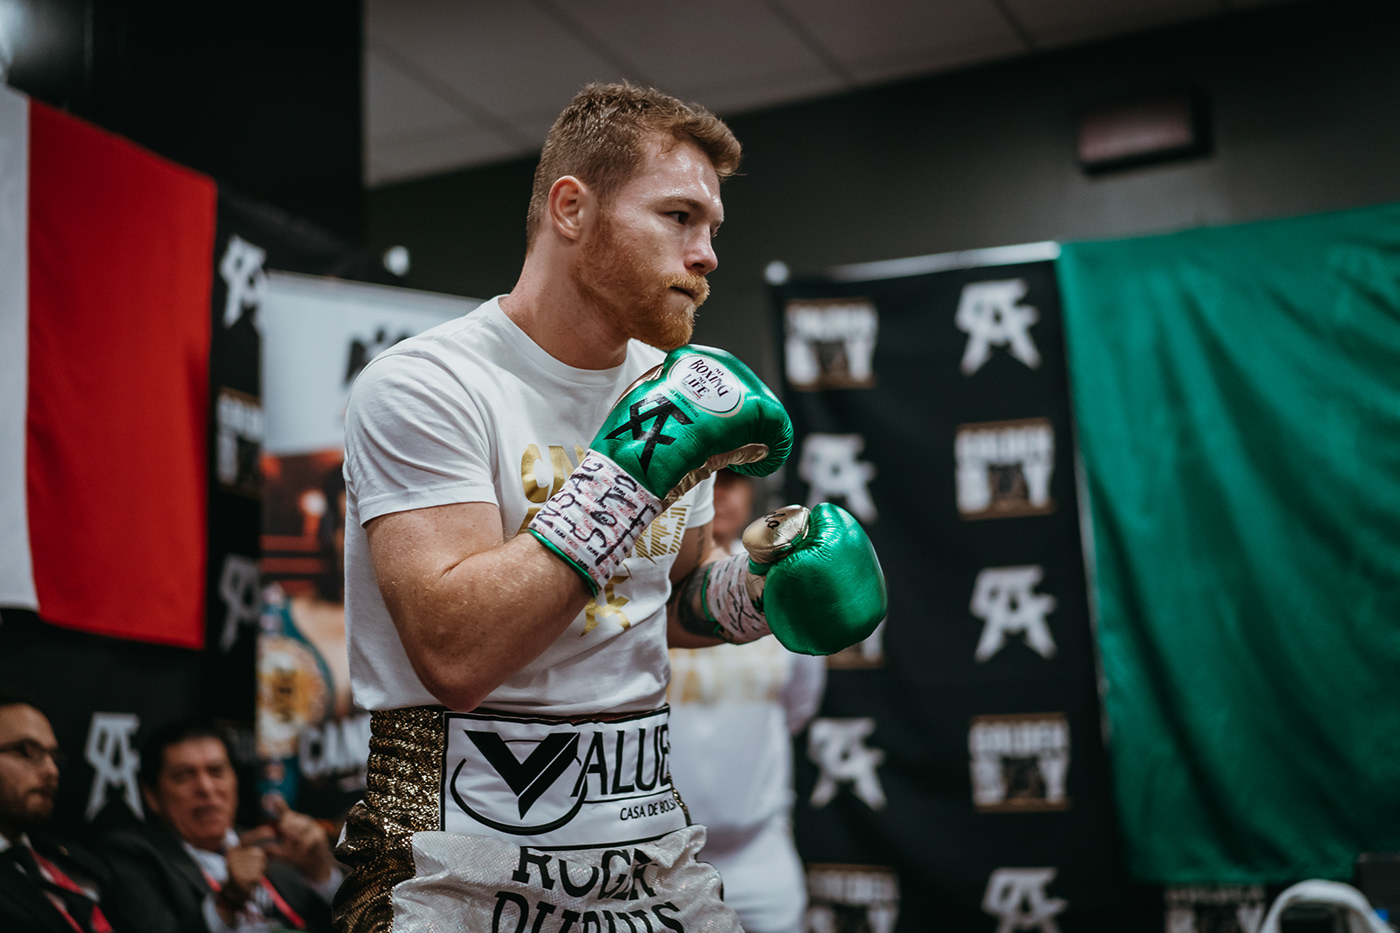 we were able to be part of the training weeks of the renowned boxer Canelo Álvarez...